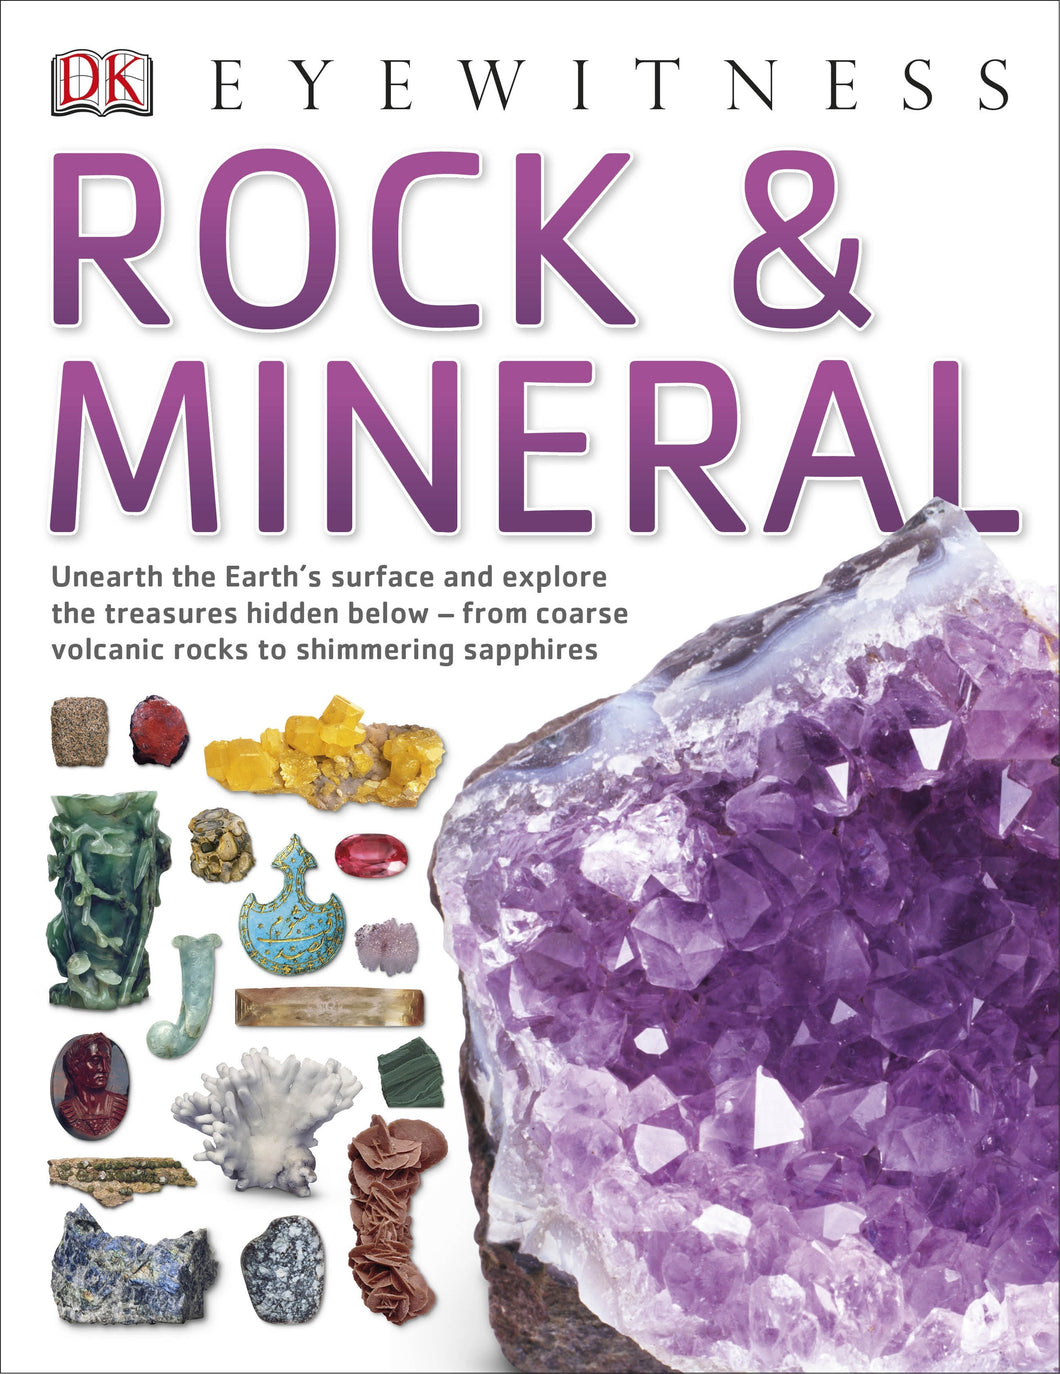 Children‘s book with colourful photographs of rocks and minerals with large amethyst cluster on the cover.